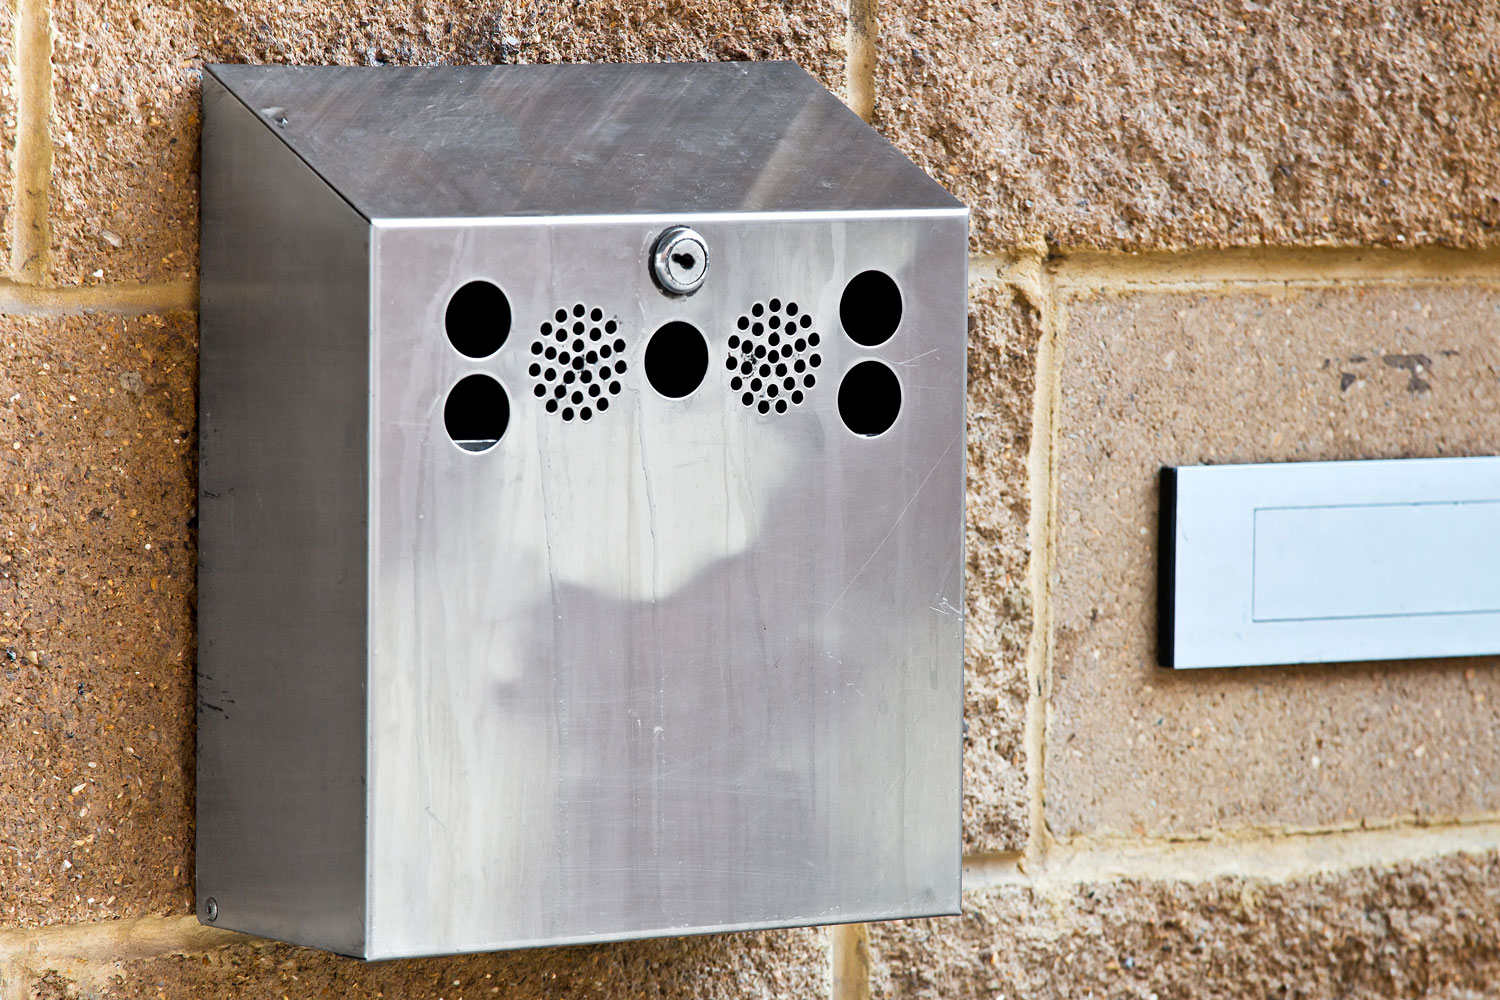 Wall Mounted Cigarette Bin To Save Space